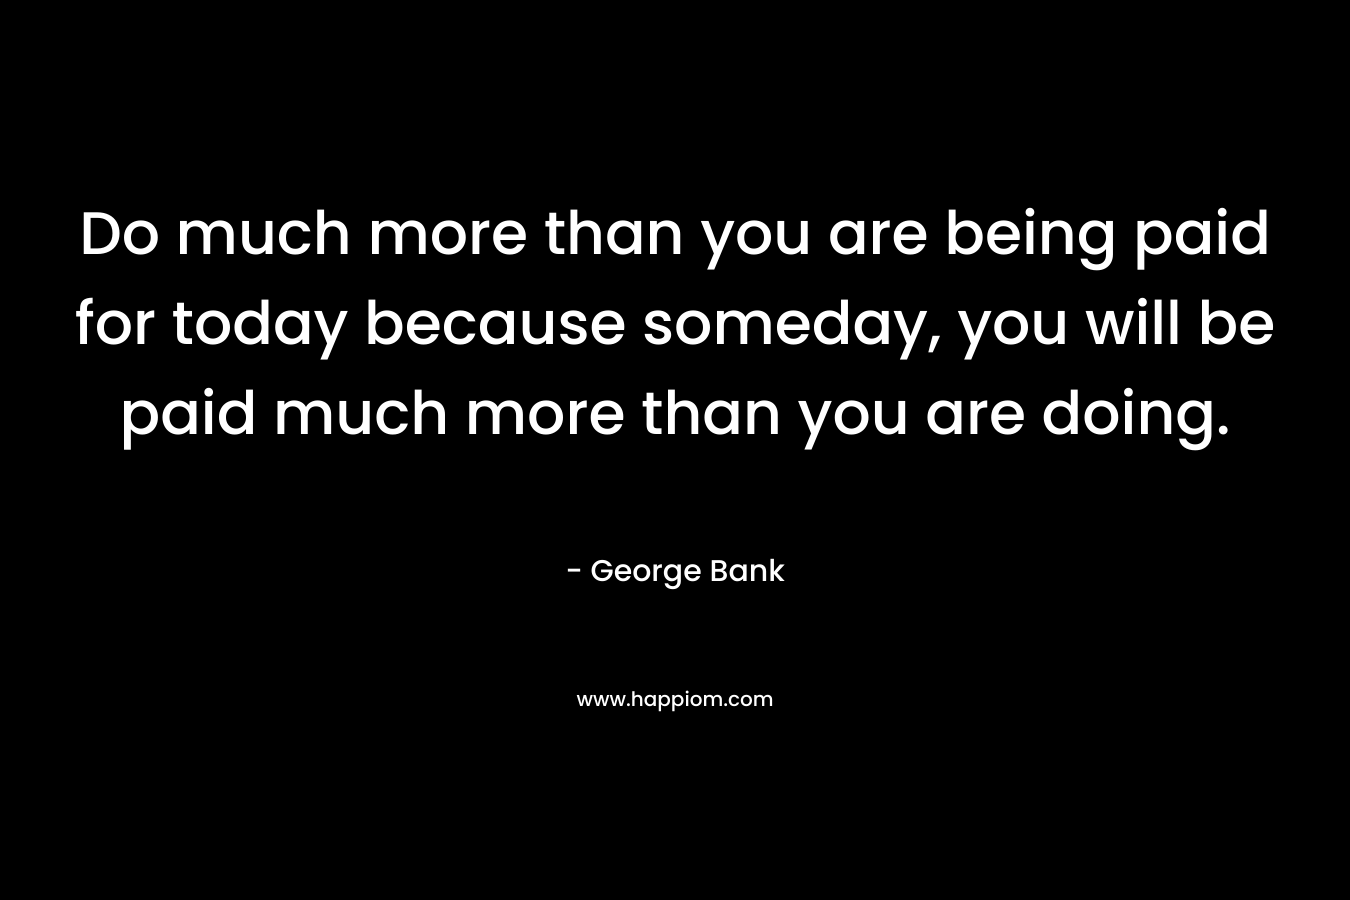 Do much more than you are being paid for today because someday, you will be paid much more than you are doing.